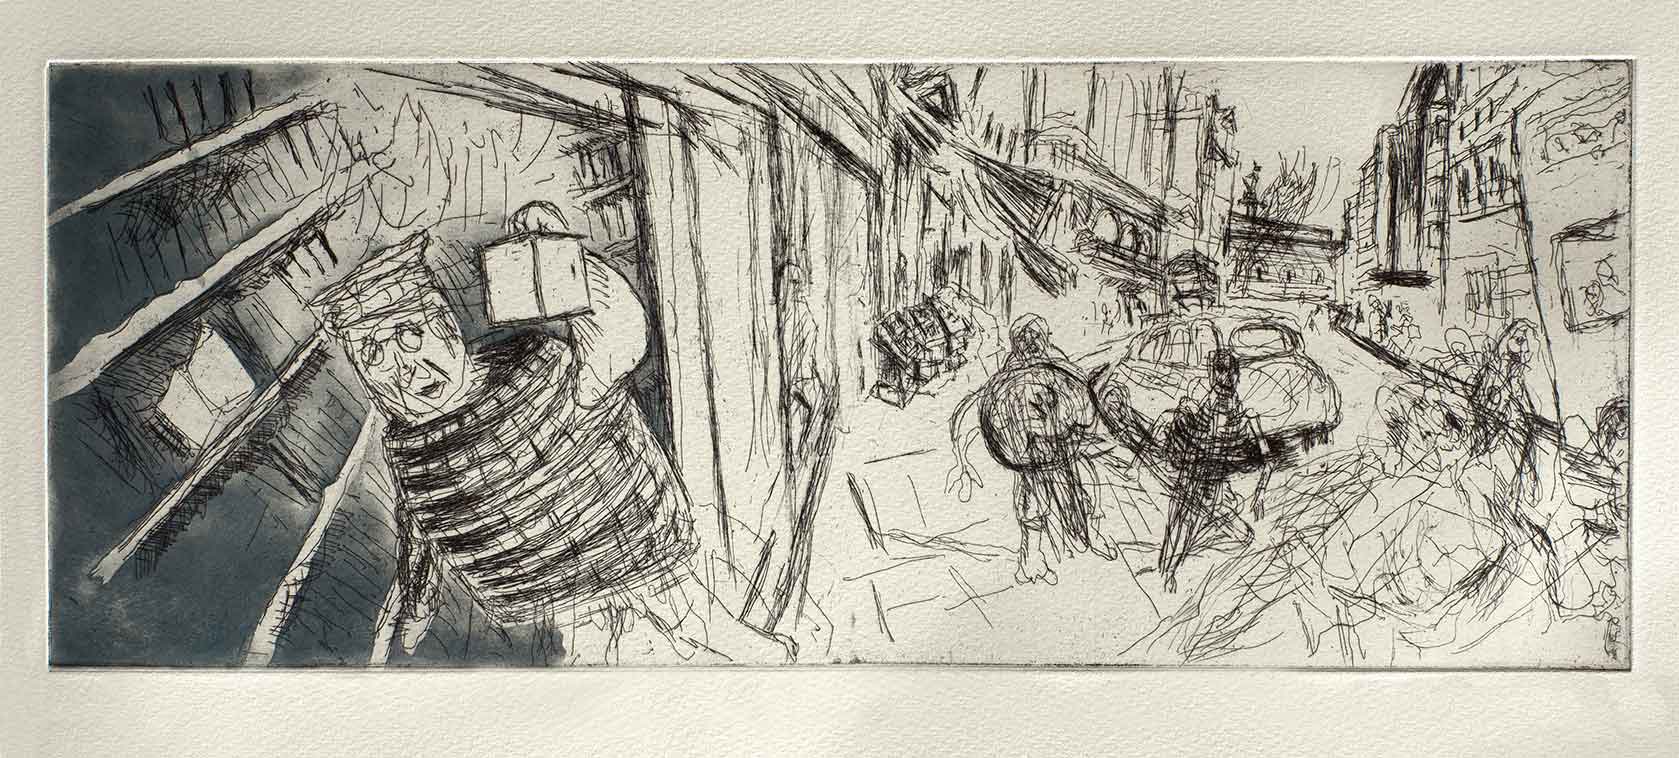 Diogenes Searches For An Honest Citizen Charing Cross Road, 28 x 54 cm, Etching on Somerset paper, Edition of 25 Printed and published by Nutmeg Editions, 2016, POA